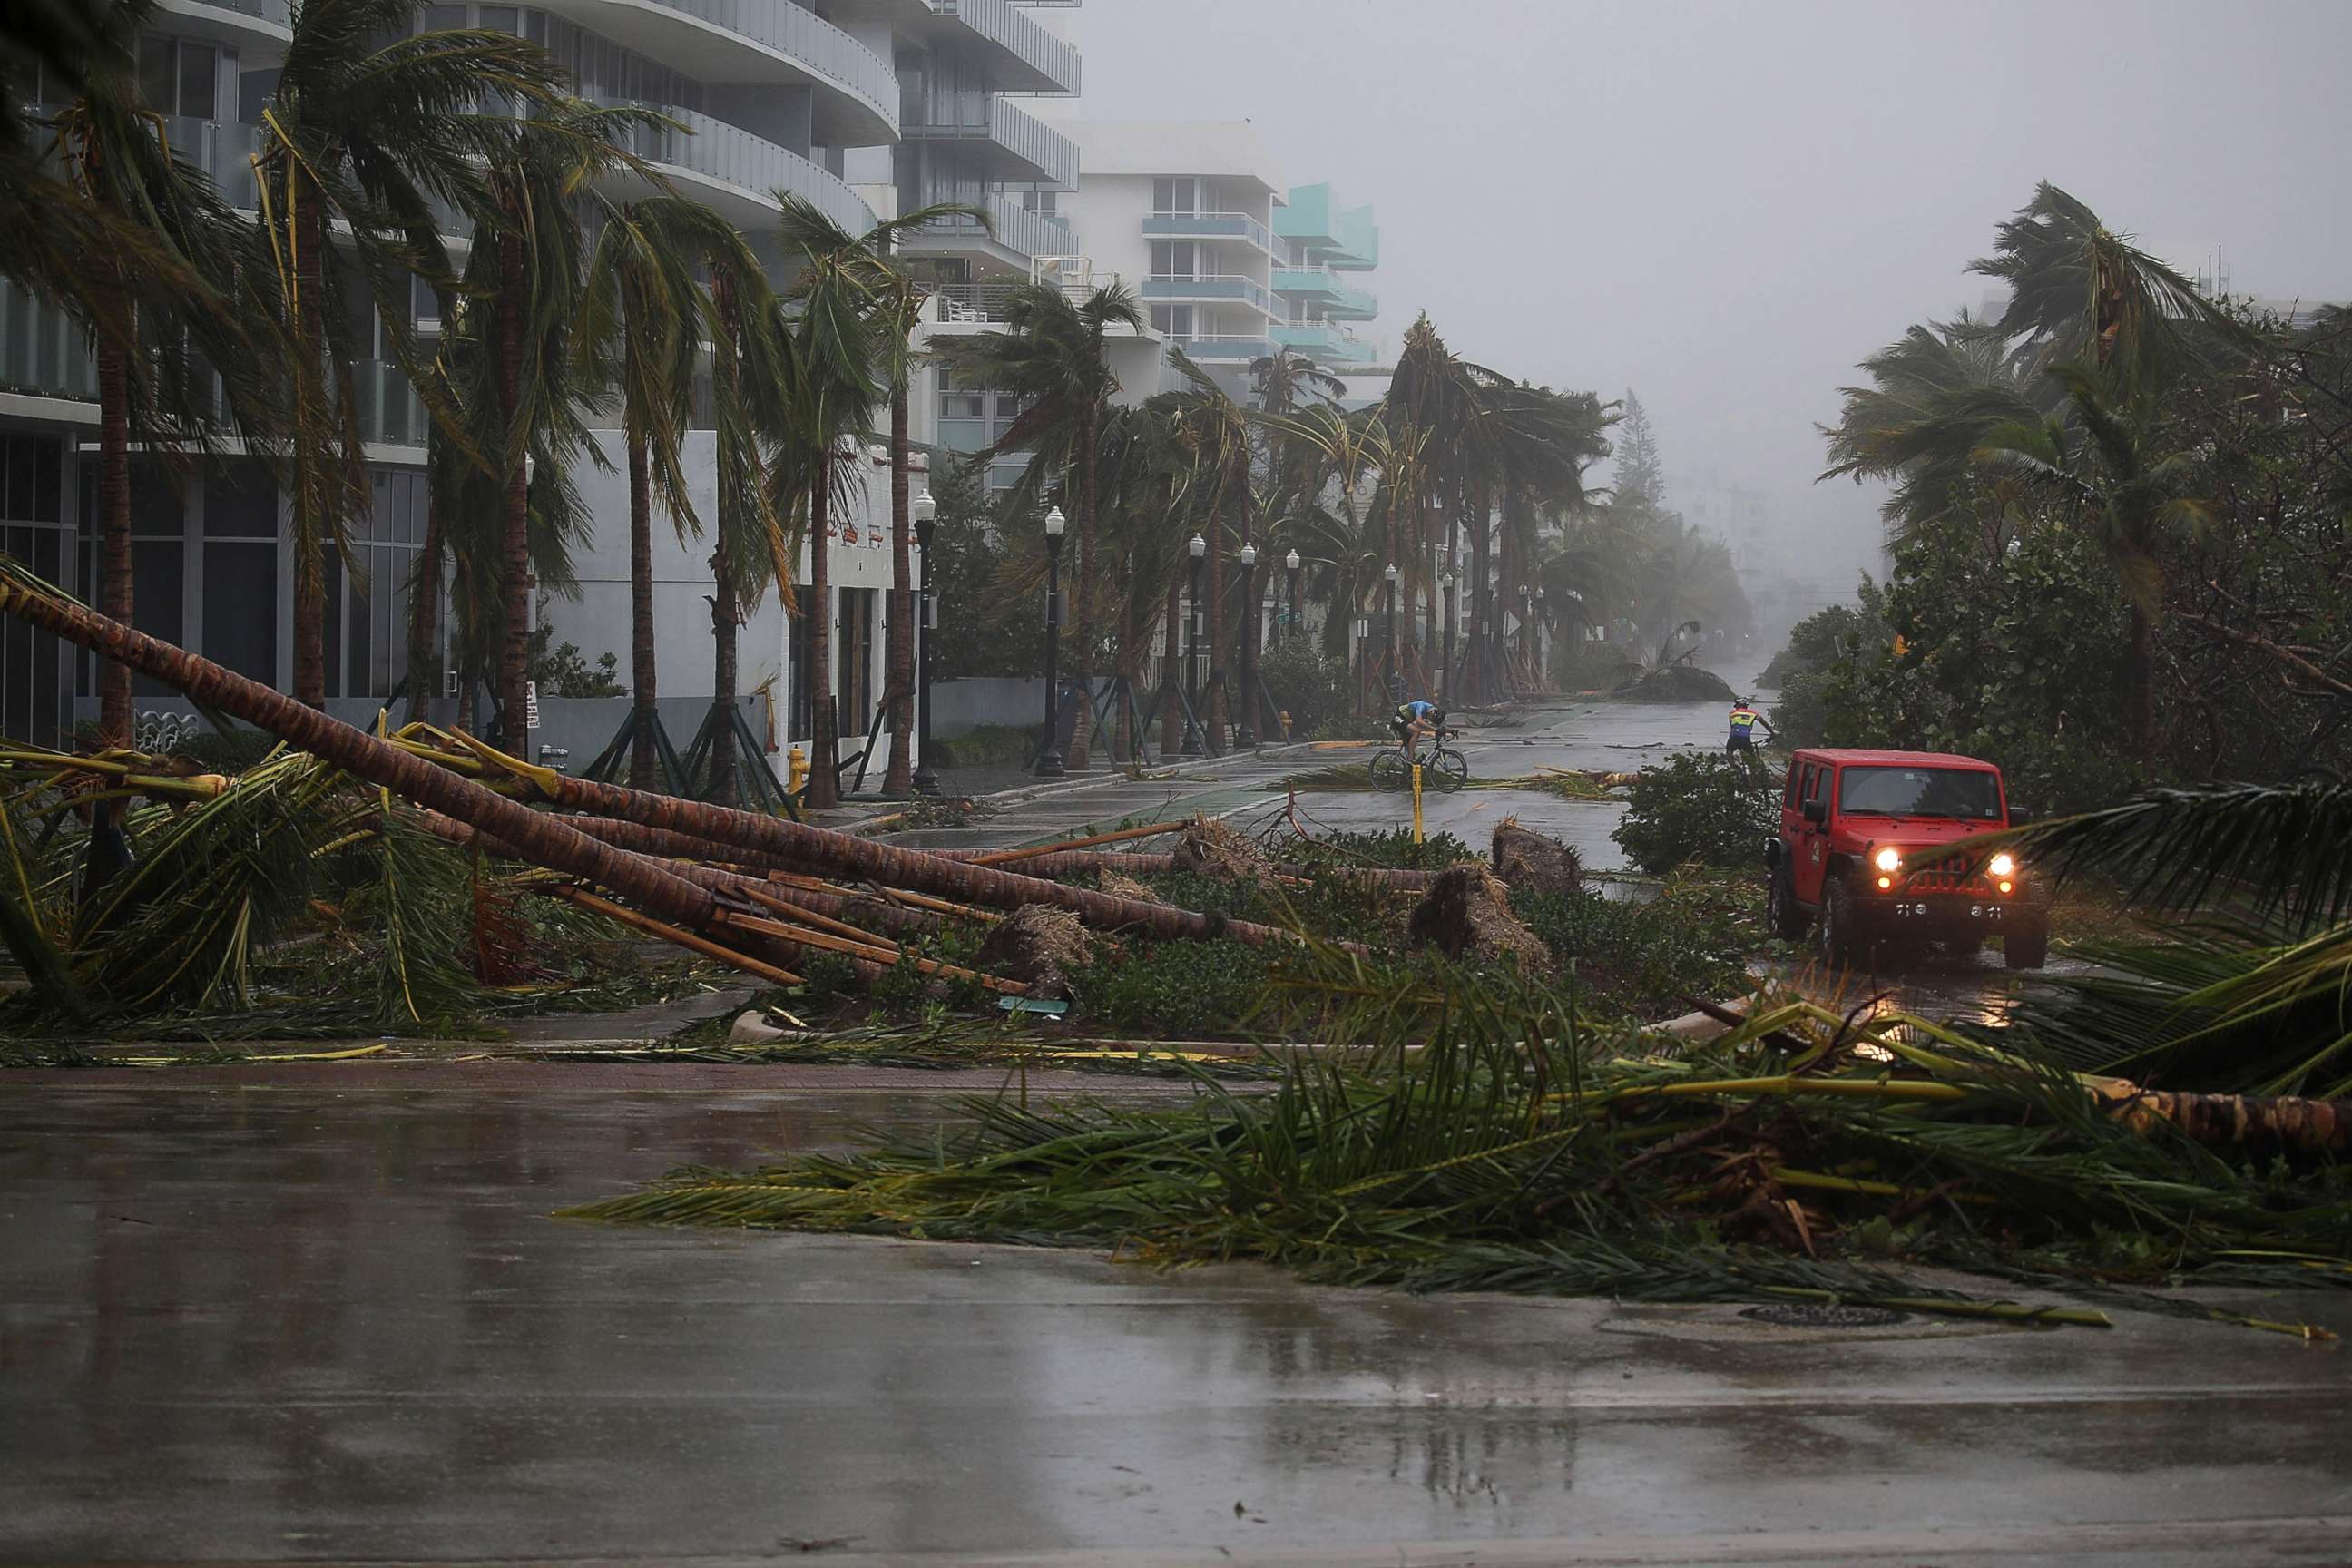 PHOTO: A vehicle passes downed palm trees and two cyclists attempt to ride as Hurricane Irma passes through the area on Sept. 10, 2017 in Miami Beach, Fla.